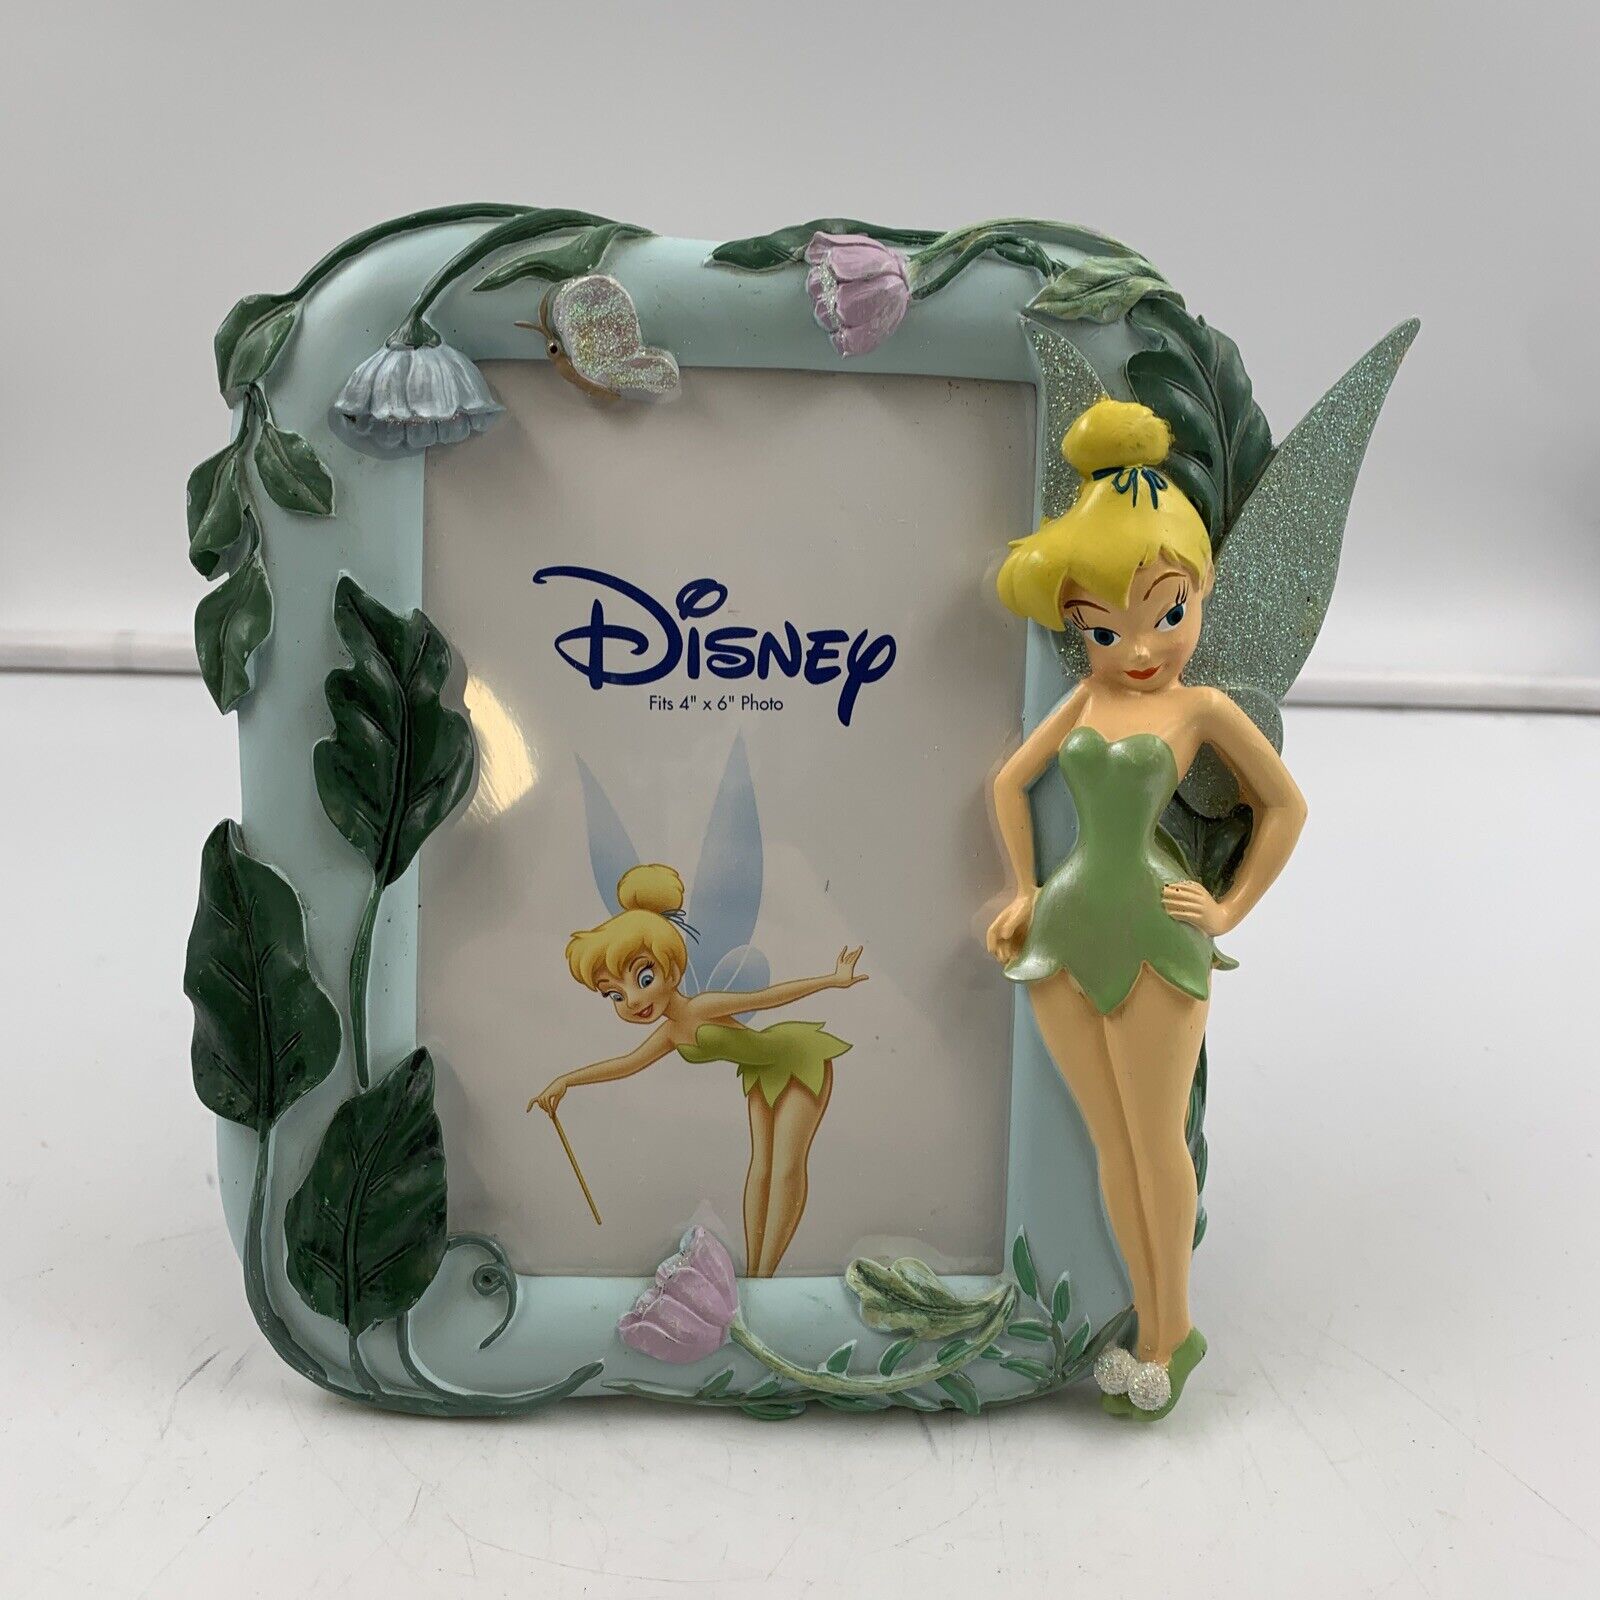 Disney Tink Tinkerbell Tinker Bell Resin Picture Photo Flower Frame For 4” X 6”